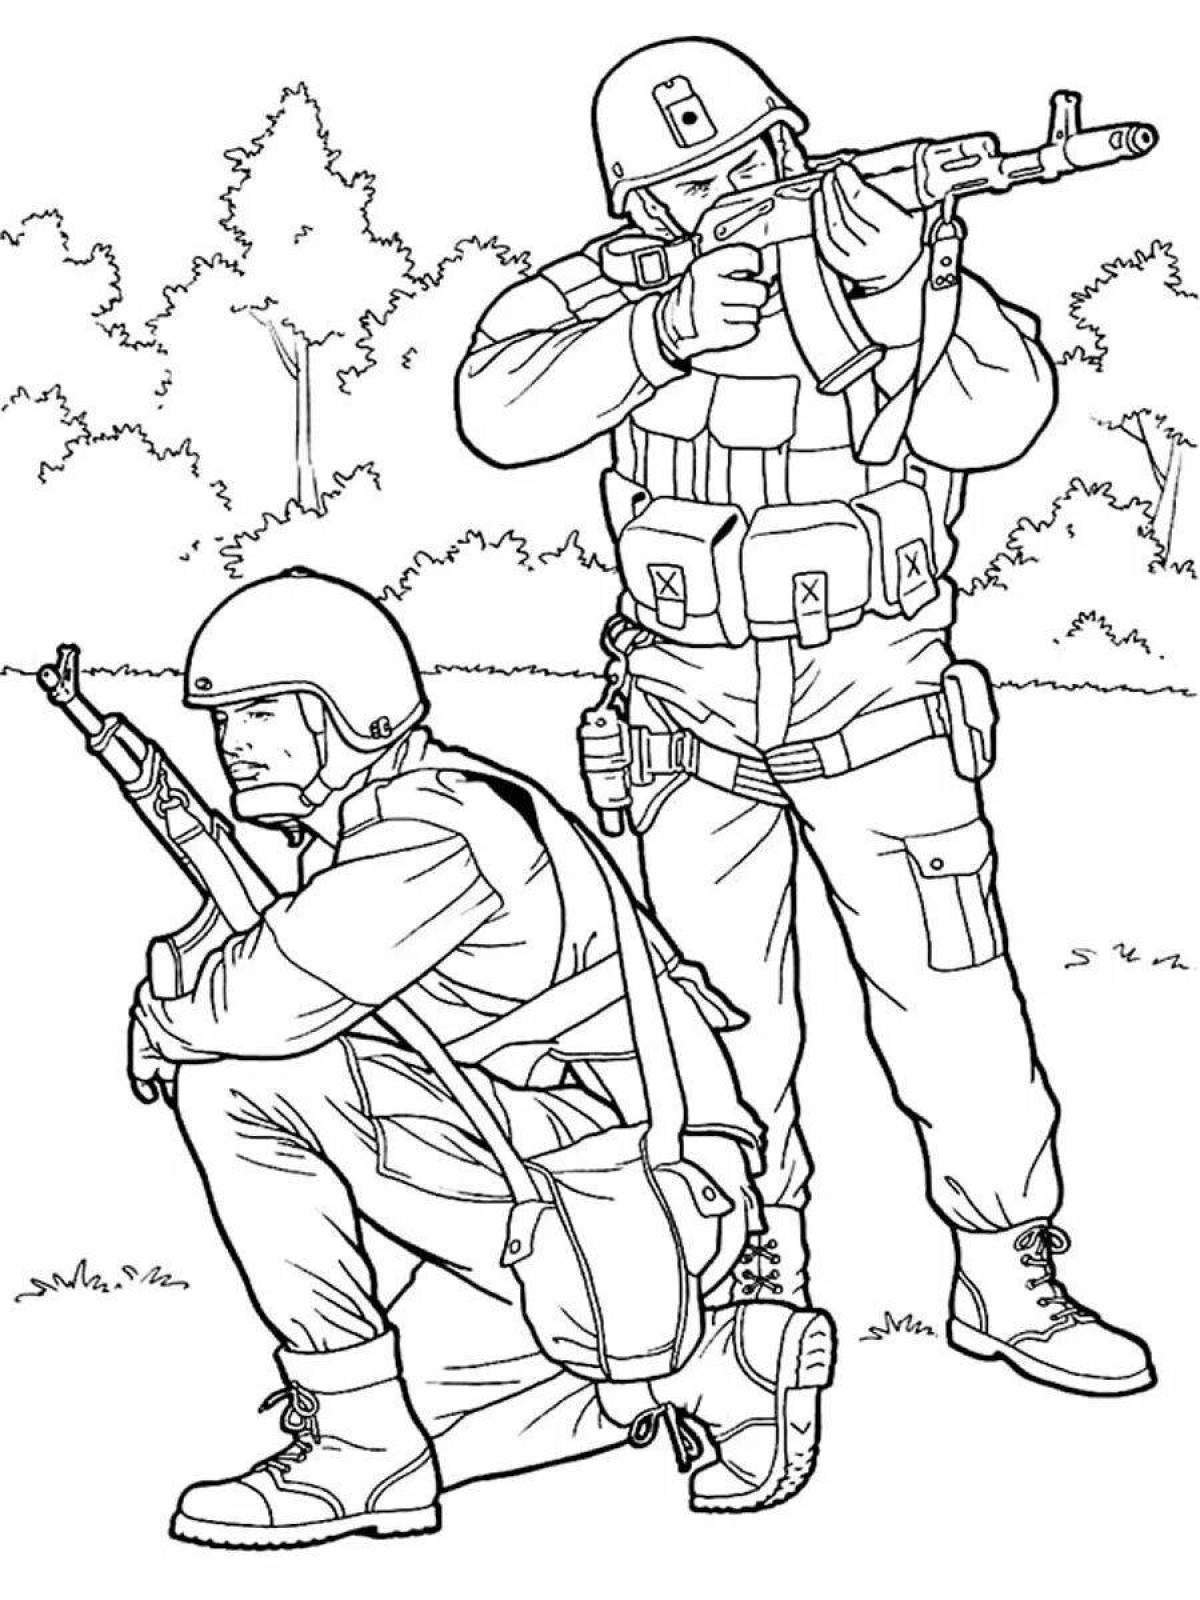 Coloring Russian soldier for children